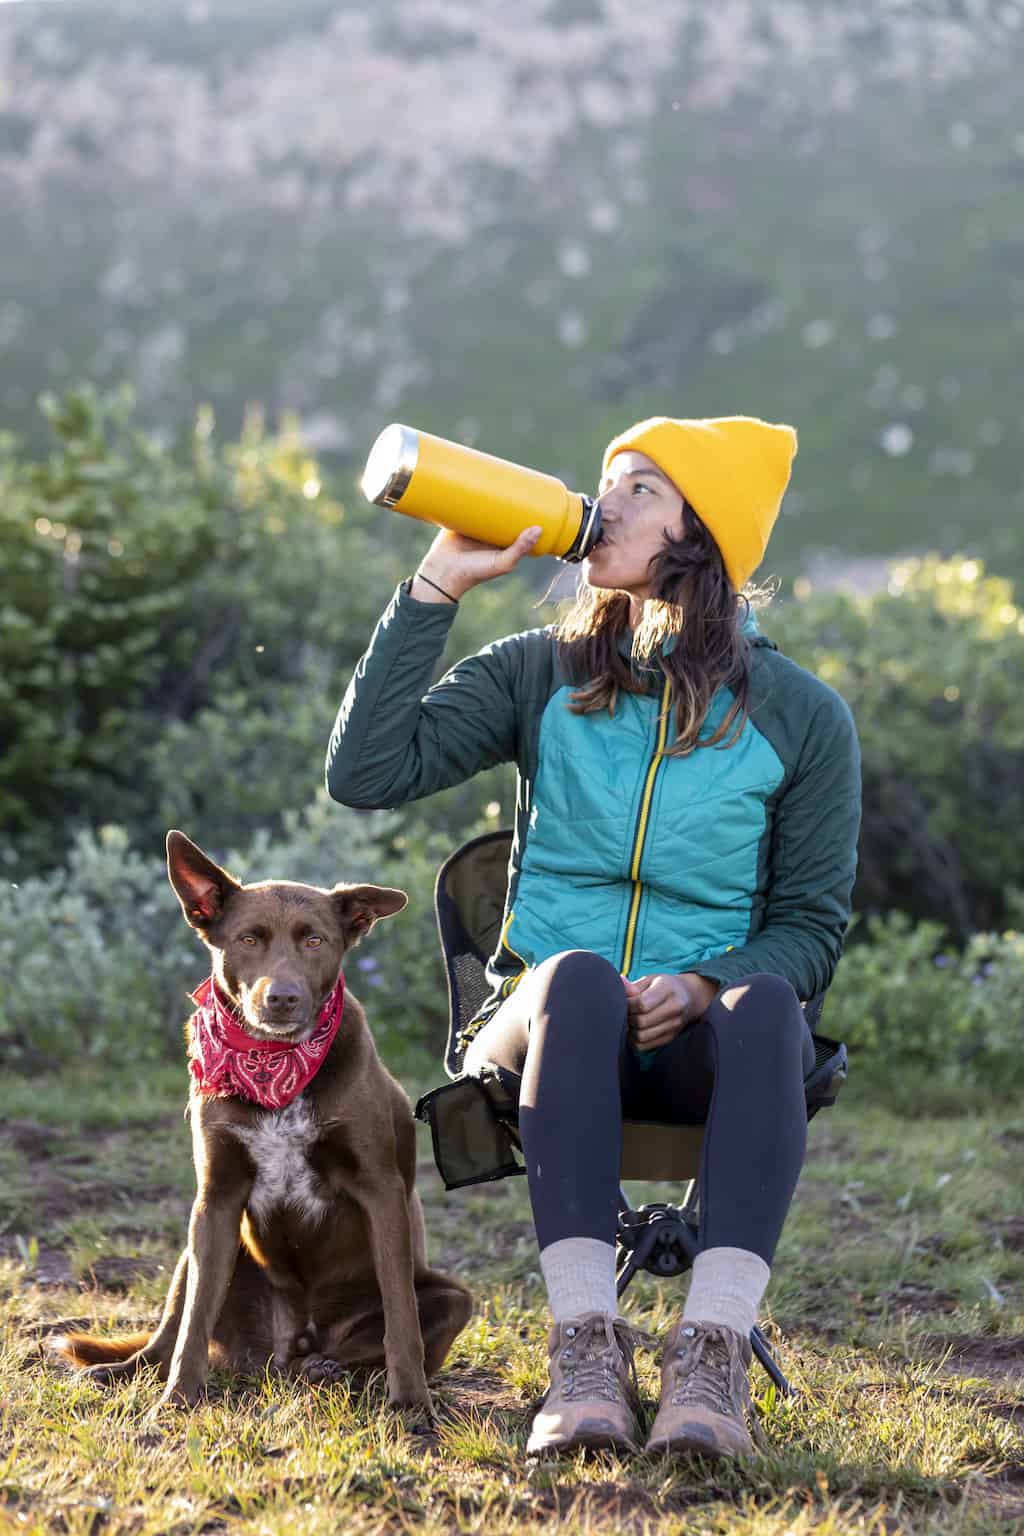 A young woman sitting outside drinking out of a bright yellow water bottle with a dog sitting next to her.